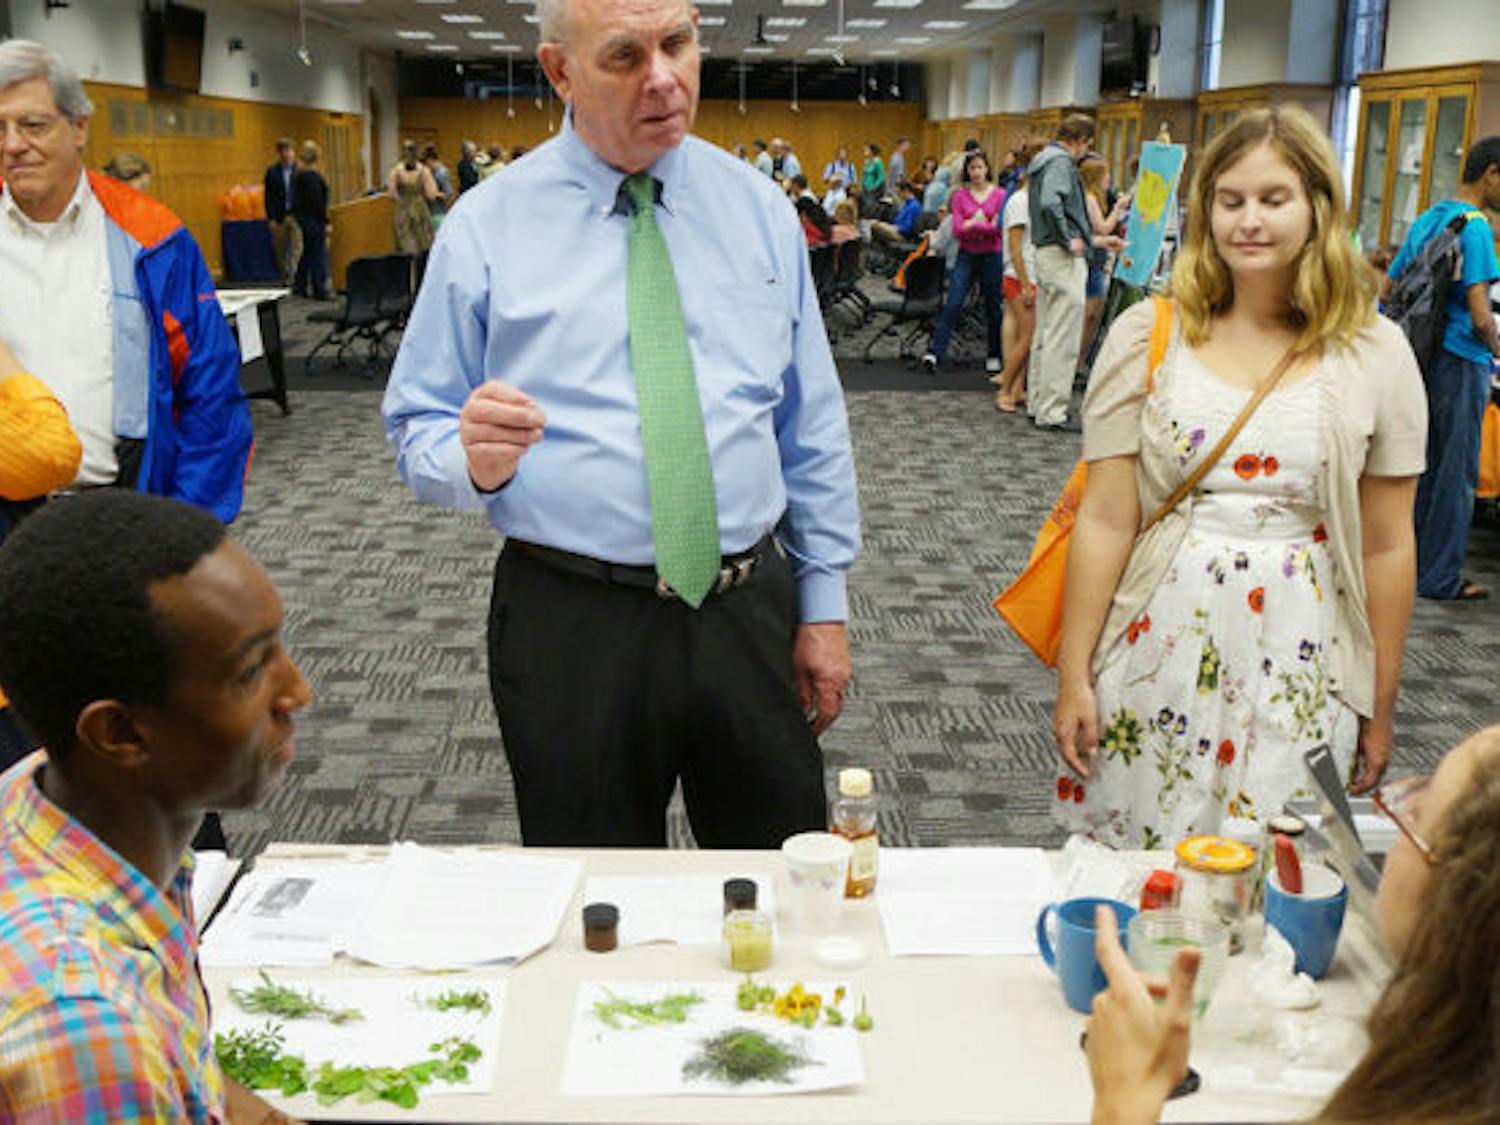 UF President Bernie Machen learns about teas from UF seniors Kamal Gray, 21, and Brielle Martinez, 21, before delivering his State of Sustainability address at Sustainable UF’s Campus Earth Day Celebration on Friday.